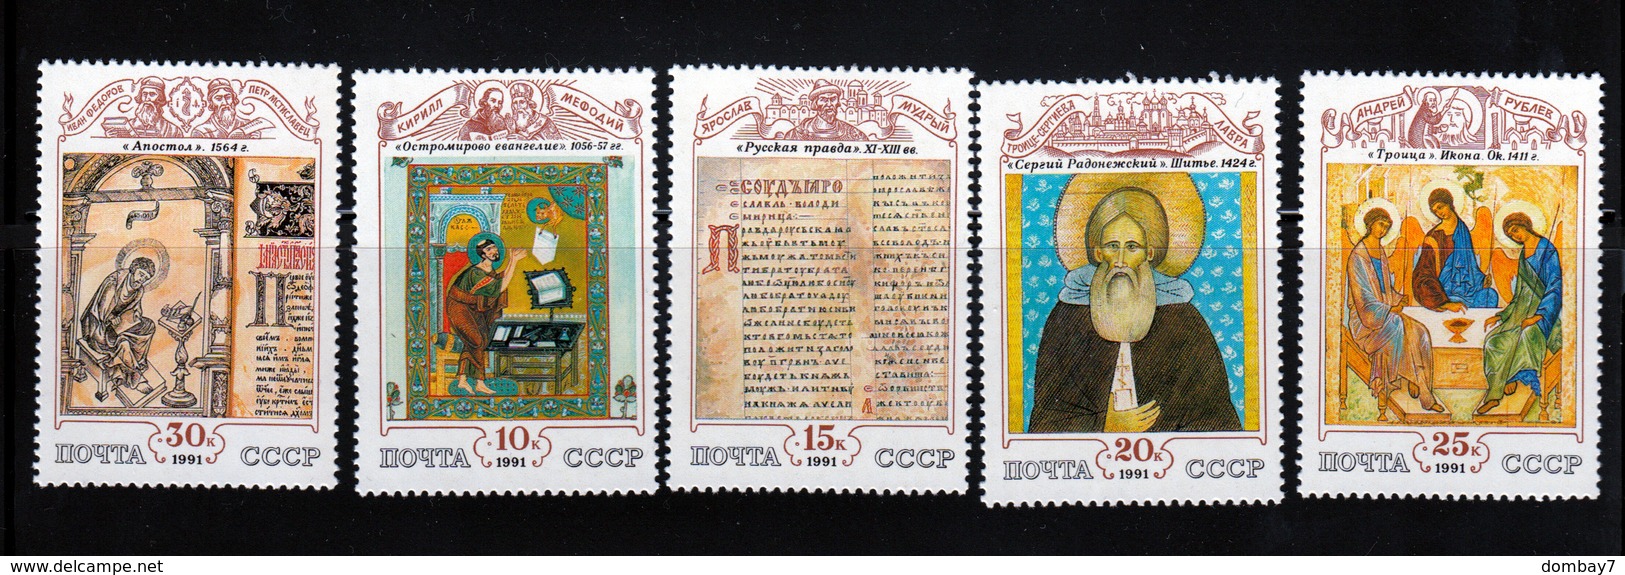 Cultural Heritage Art MNH 1991 Sc 6004-6008 Mi 6204-6208 Complete Set Of 5 Russia - Christianity